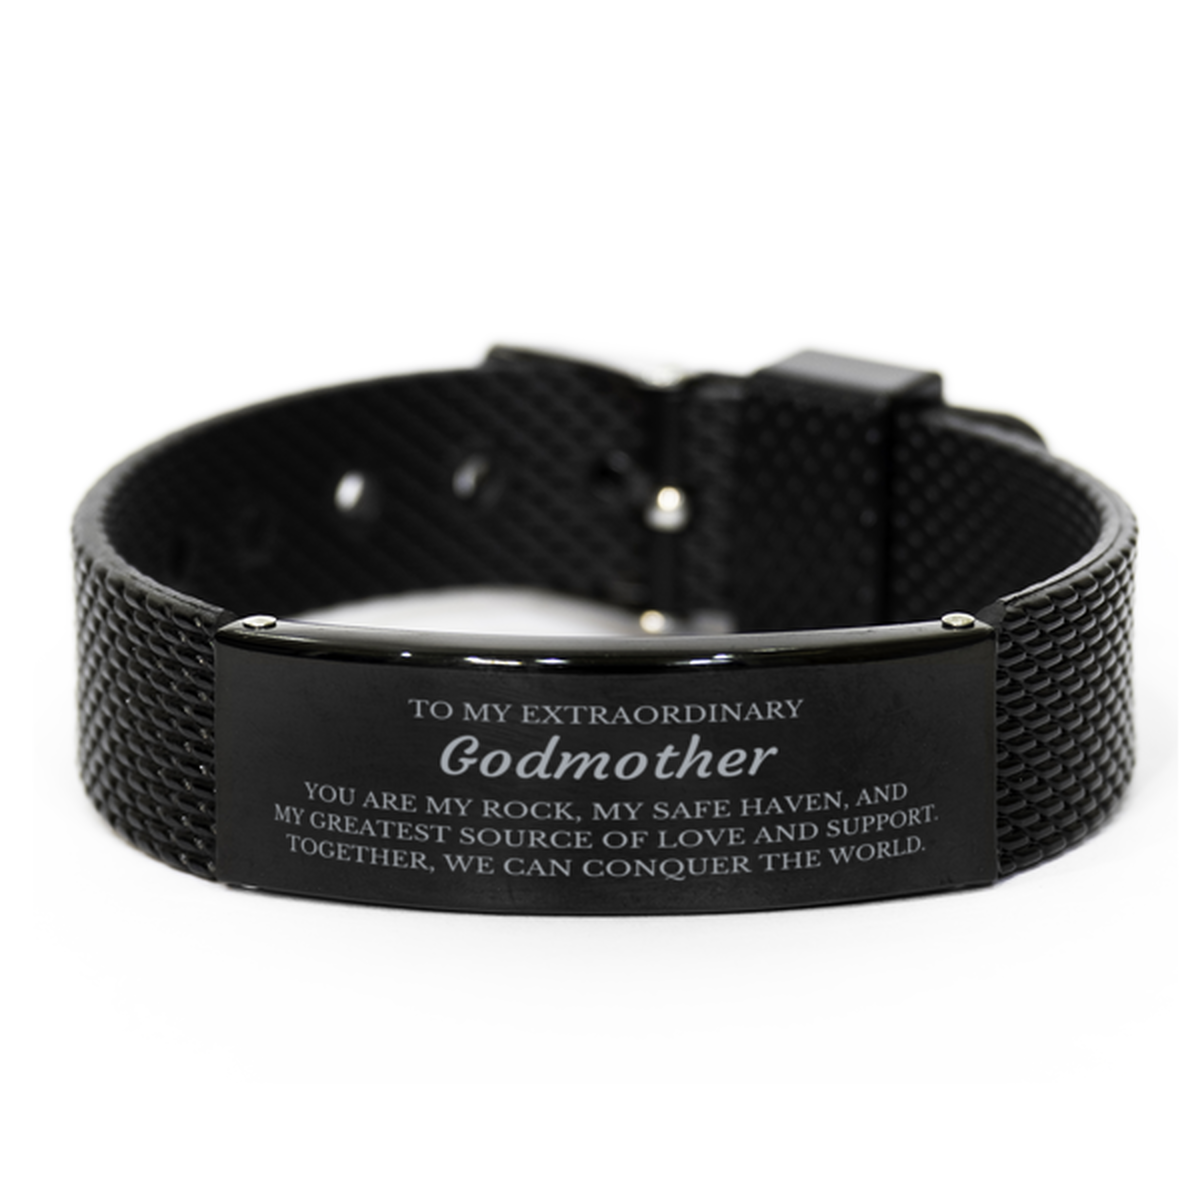 To My Extraordinary Godmother Gifts, Together, we can conquer the world, Birthday Black Shark Mesh Bracelet For Godmother, Christmas Gifts For Godmother